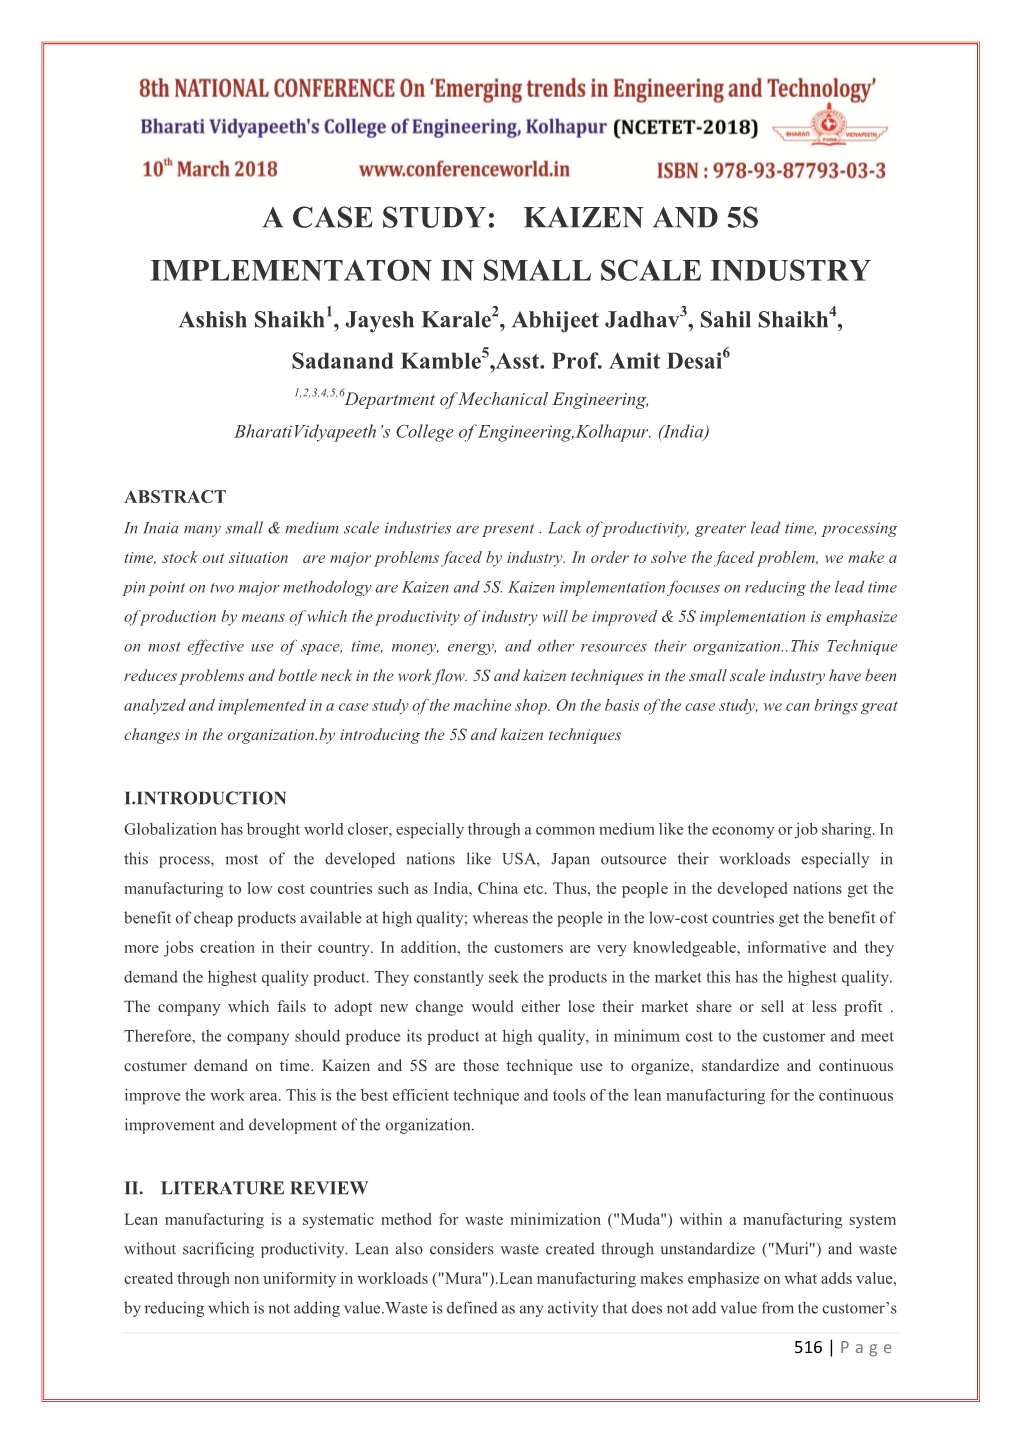 A Case Study: Kaizen and 5S Implementaton in Small Scale Industry